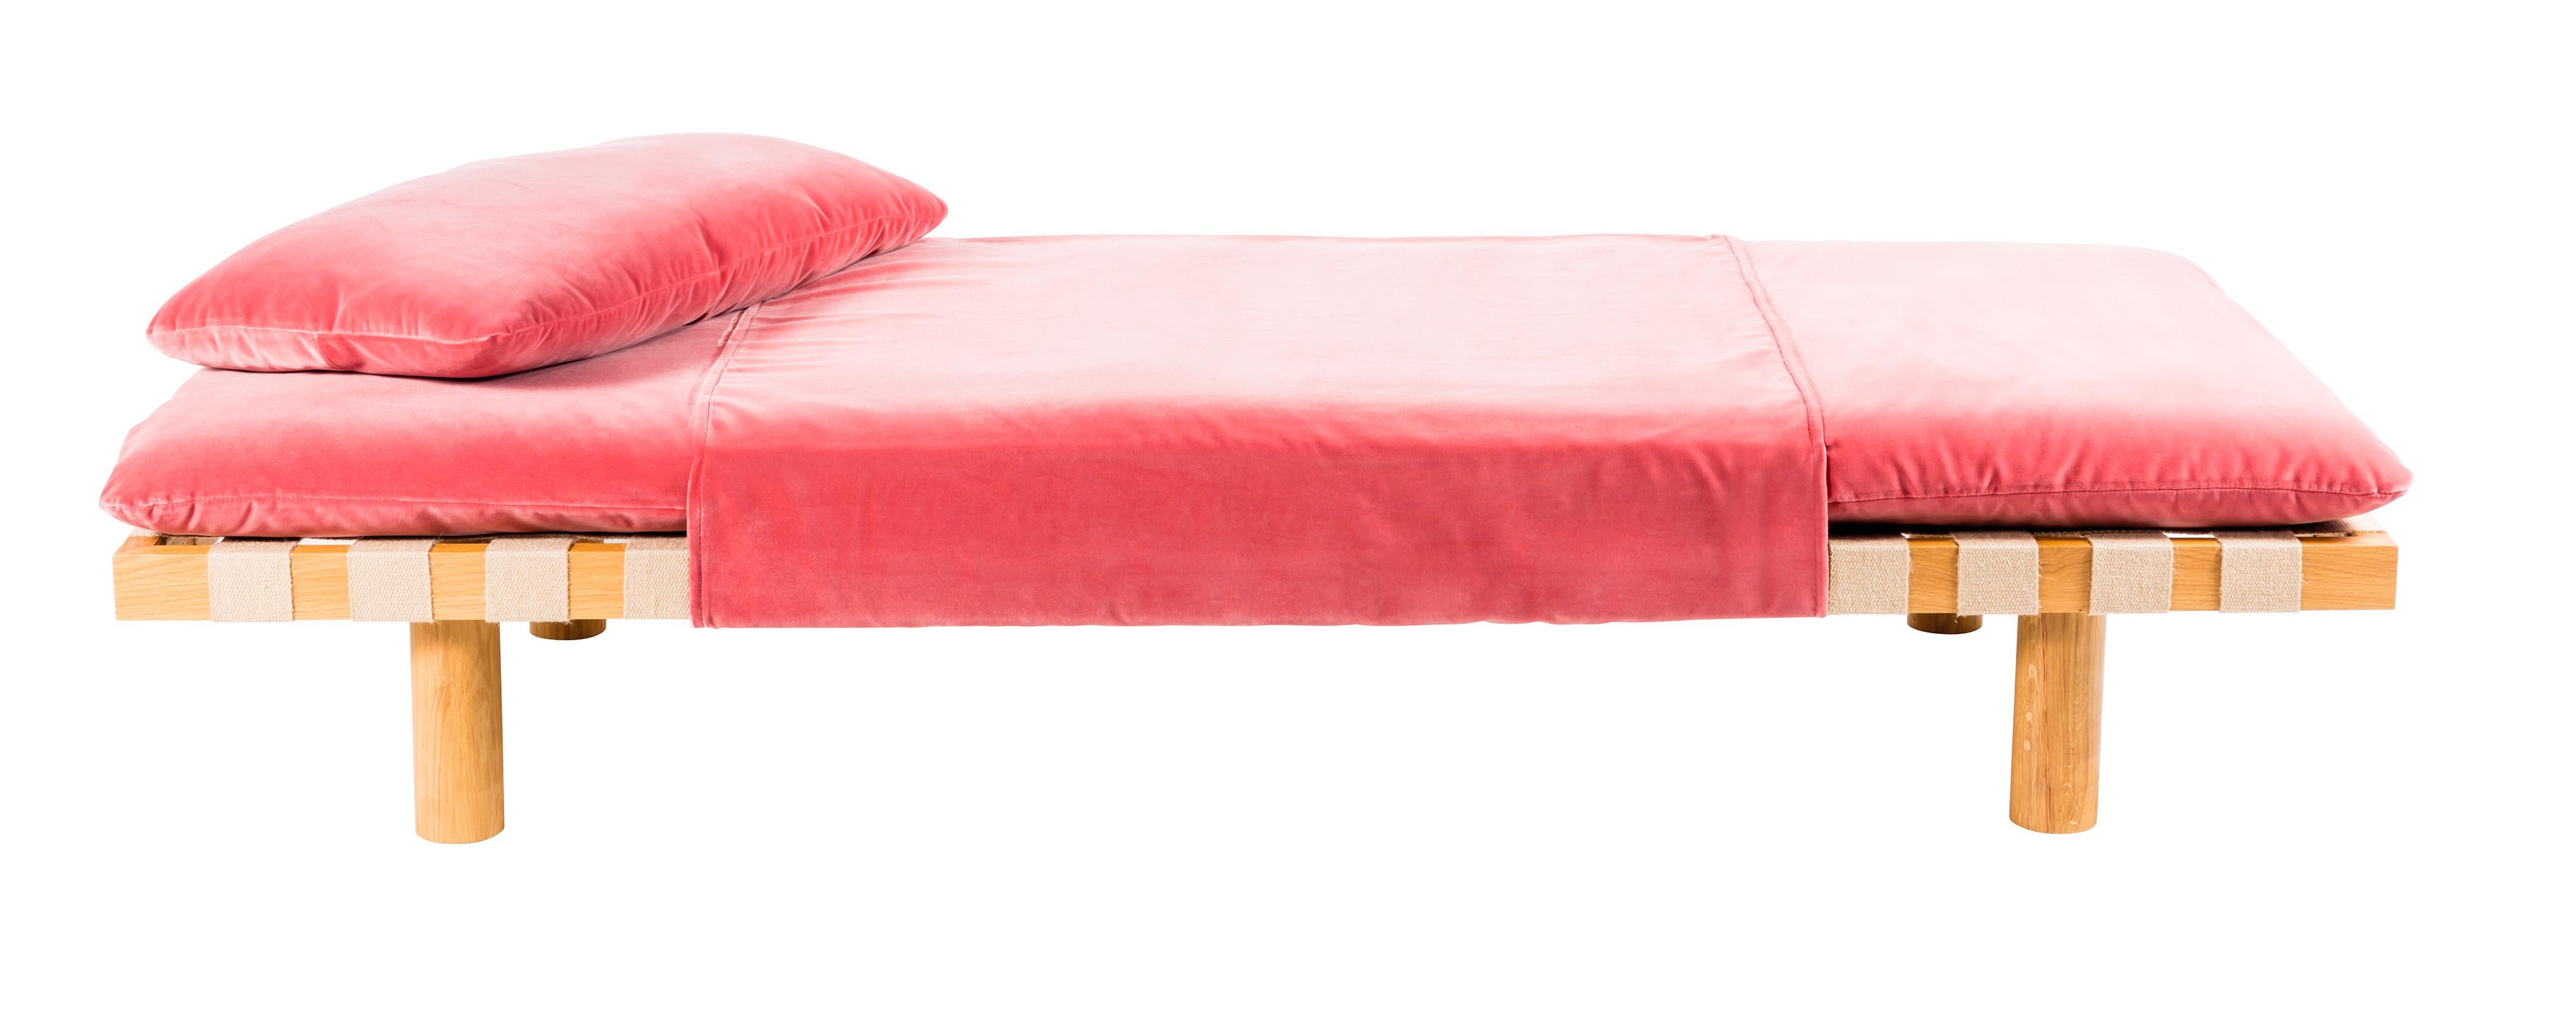 Pallet dirty pink velvet nature day bed by Pulpo
Dimensions: D200 x W80 x H29 cm
Materials: fabric/leather, foam and wood

Also available in different colours and finishes.

Thinking about the first significant furniture for pulpo with the